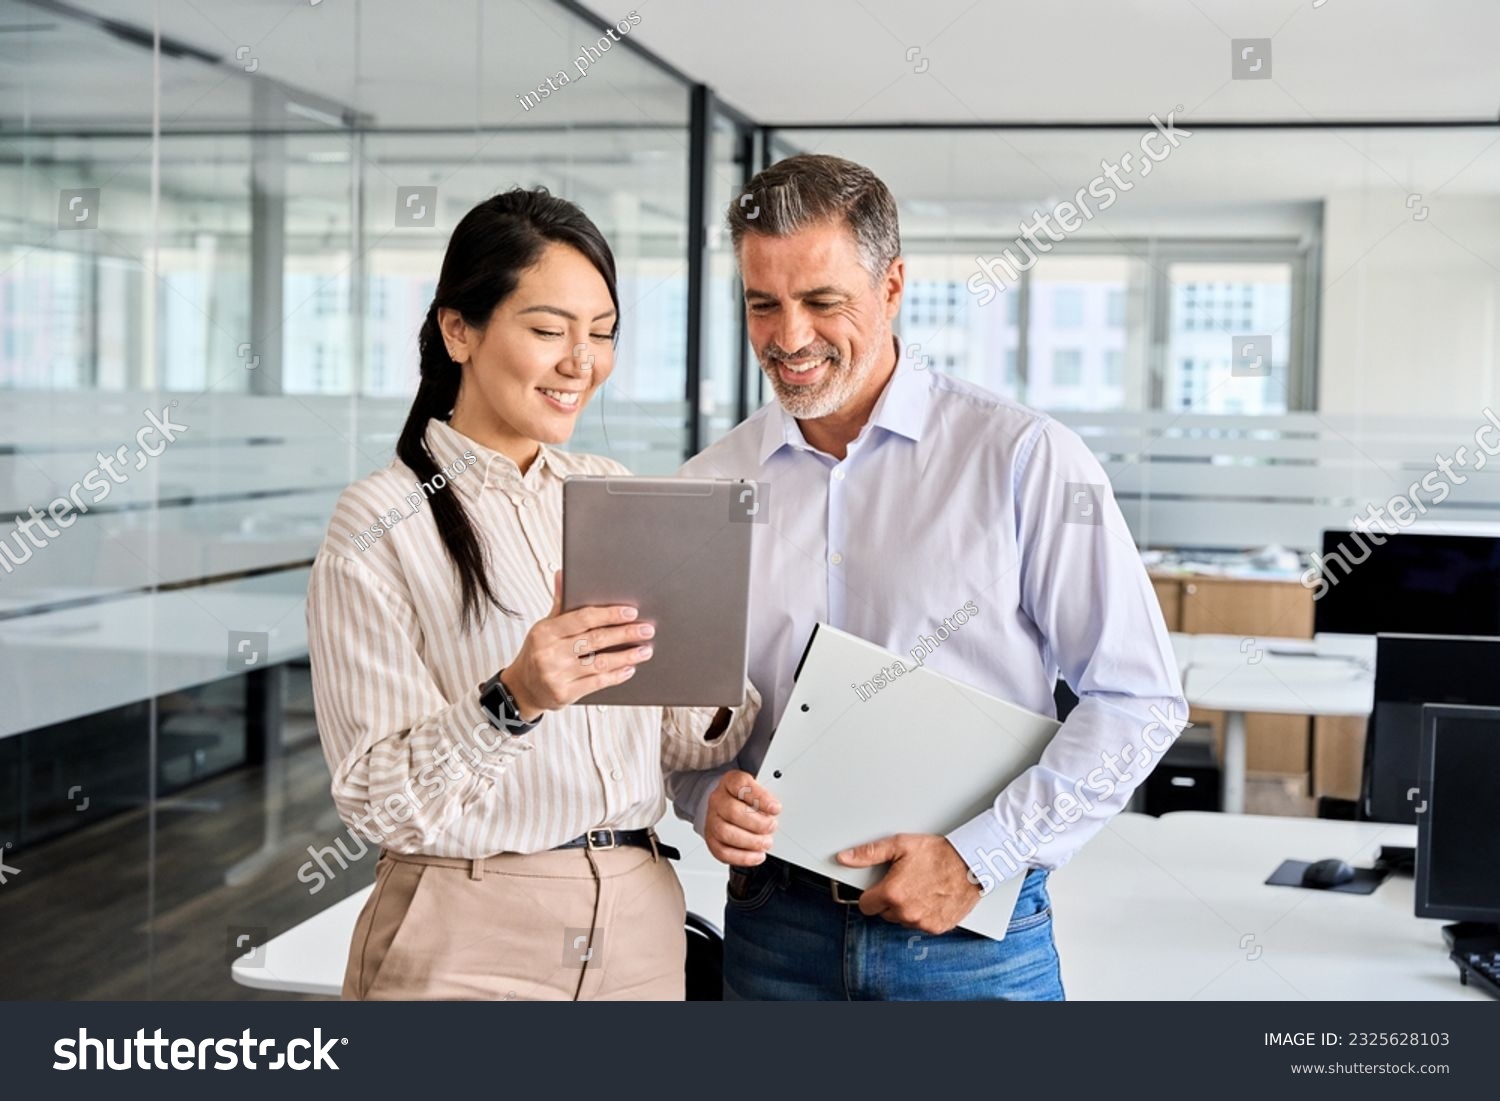 Two happy professional business people team Asian woman and Latin man workers working using digital tablet tech discussing financial market data standing at corporate office meeting. #2325628103